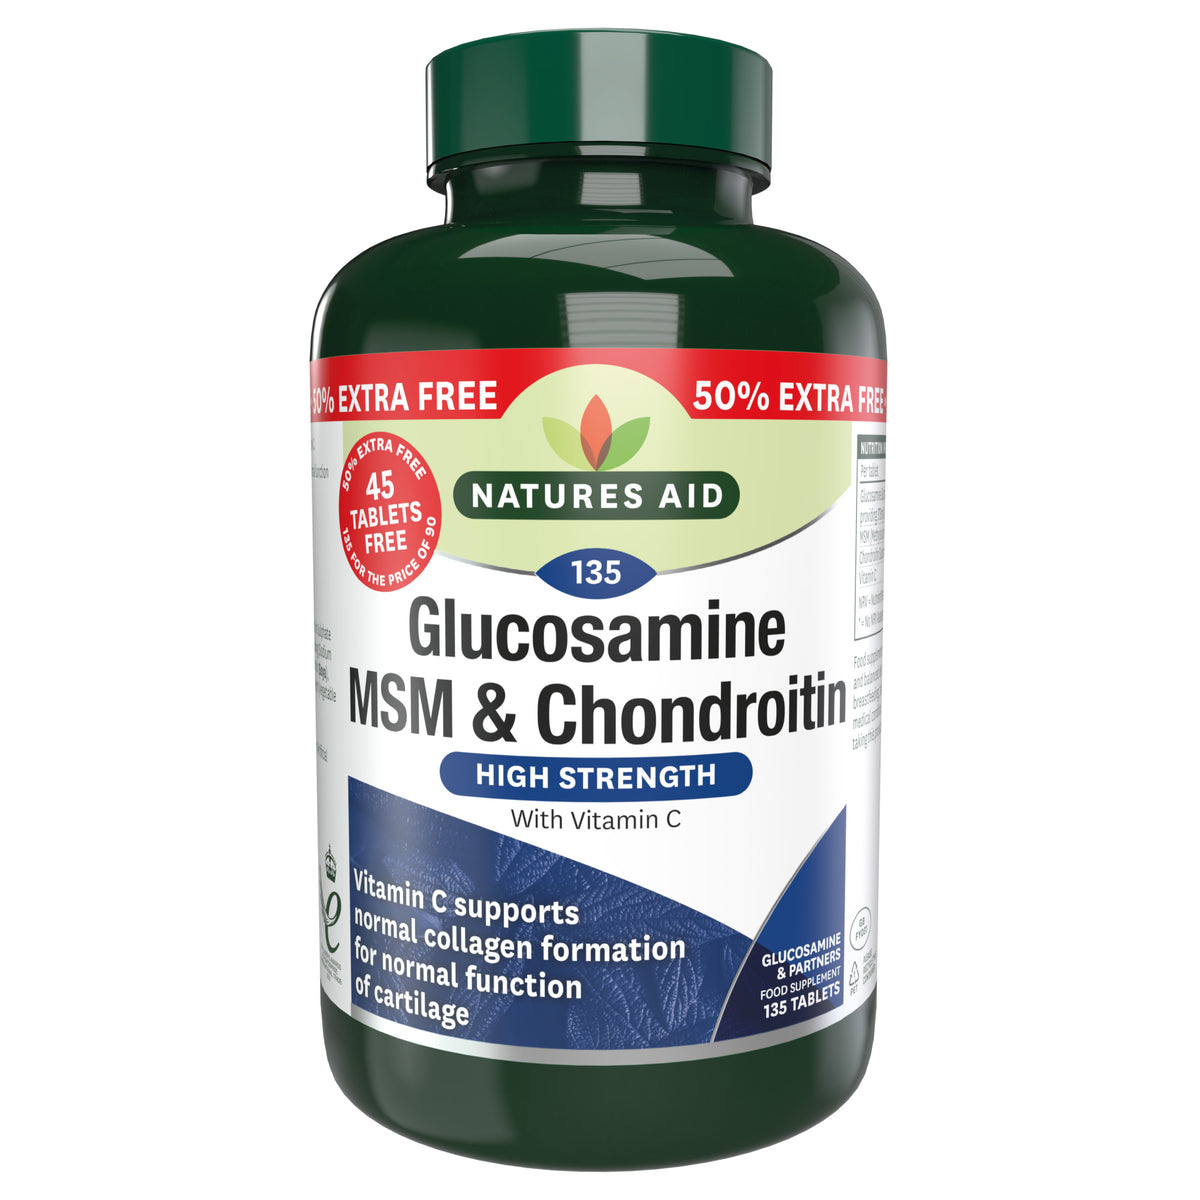 Natures Aid Glucosamine, MSM & Chondroitin 50% Extra 135 tablets